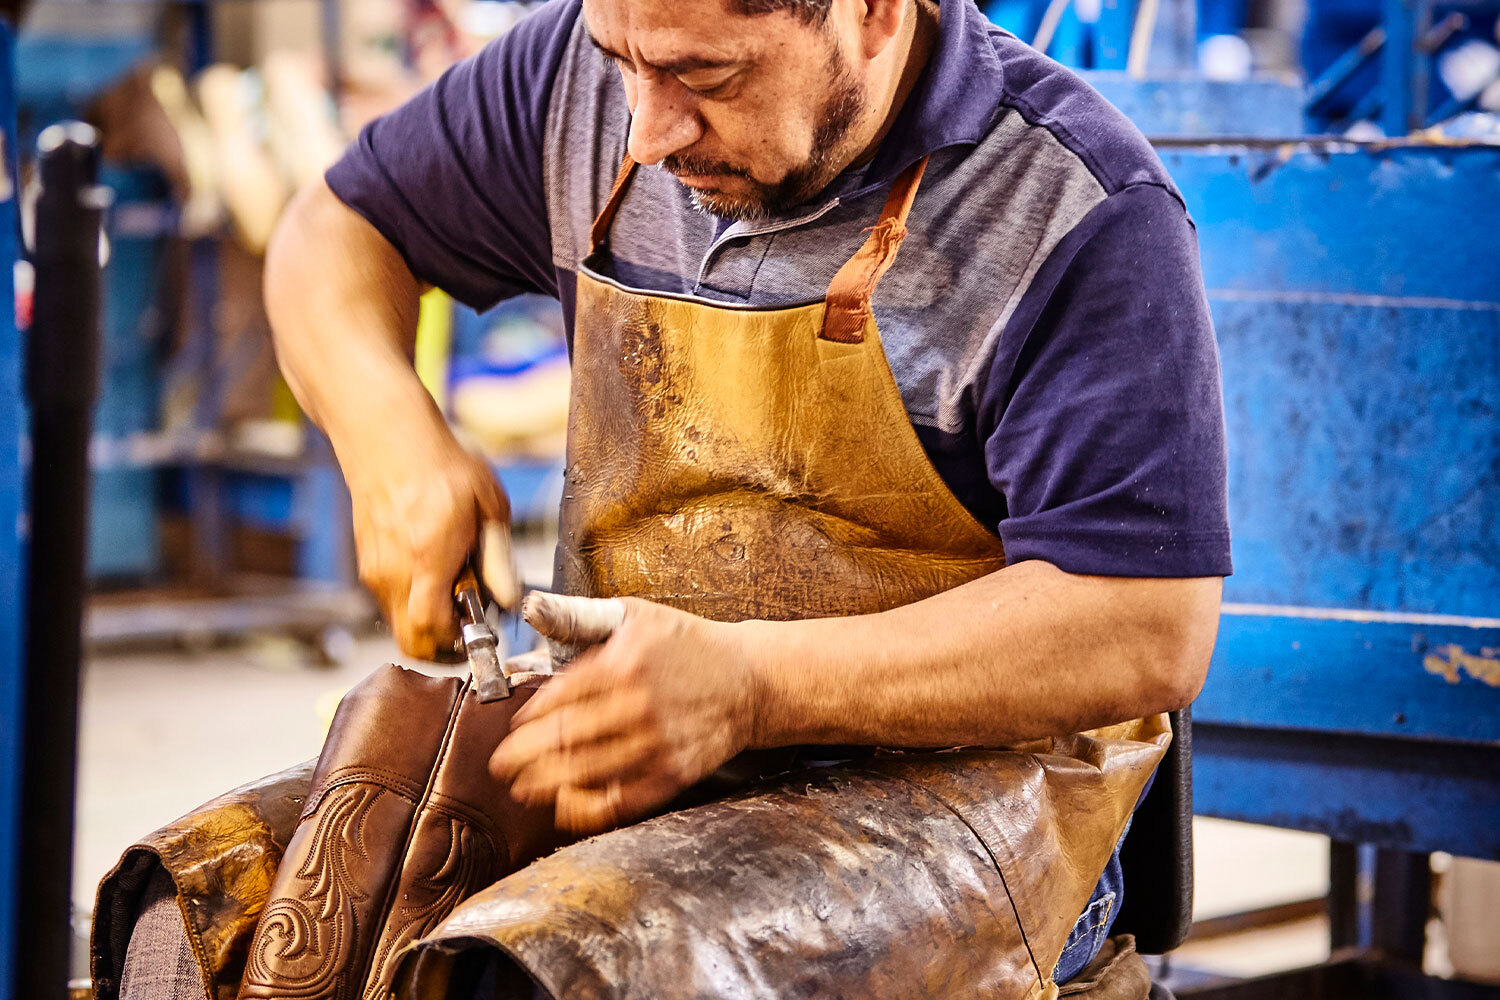 An employee works on a boot in the Lucchese factory.